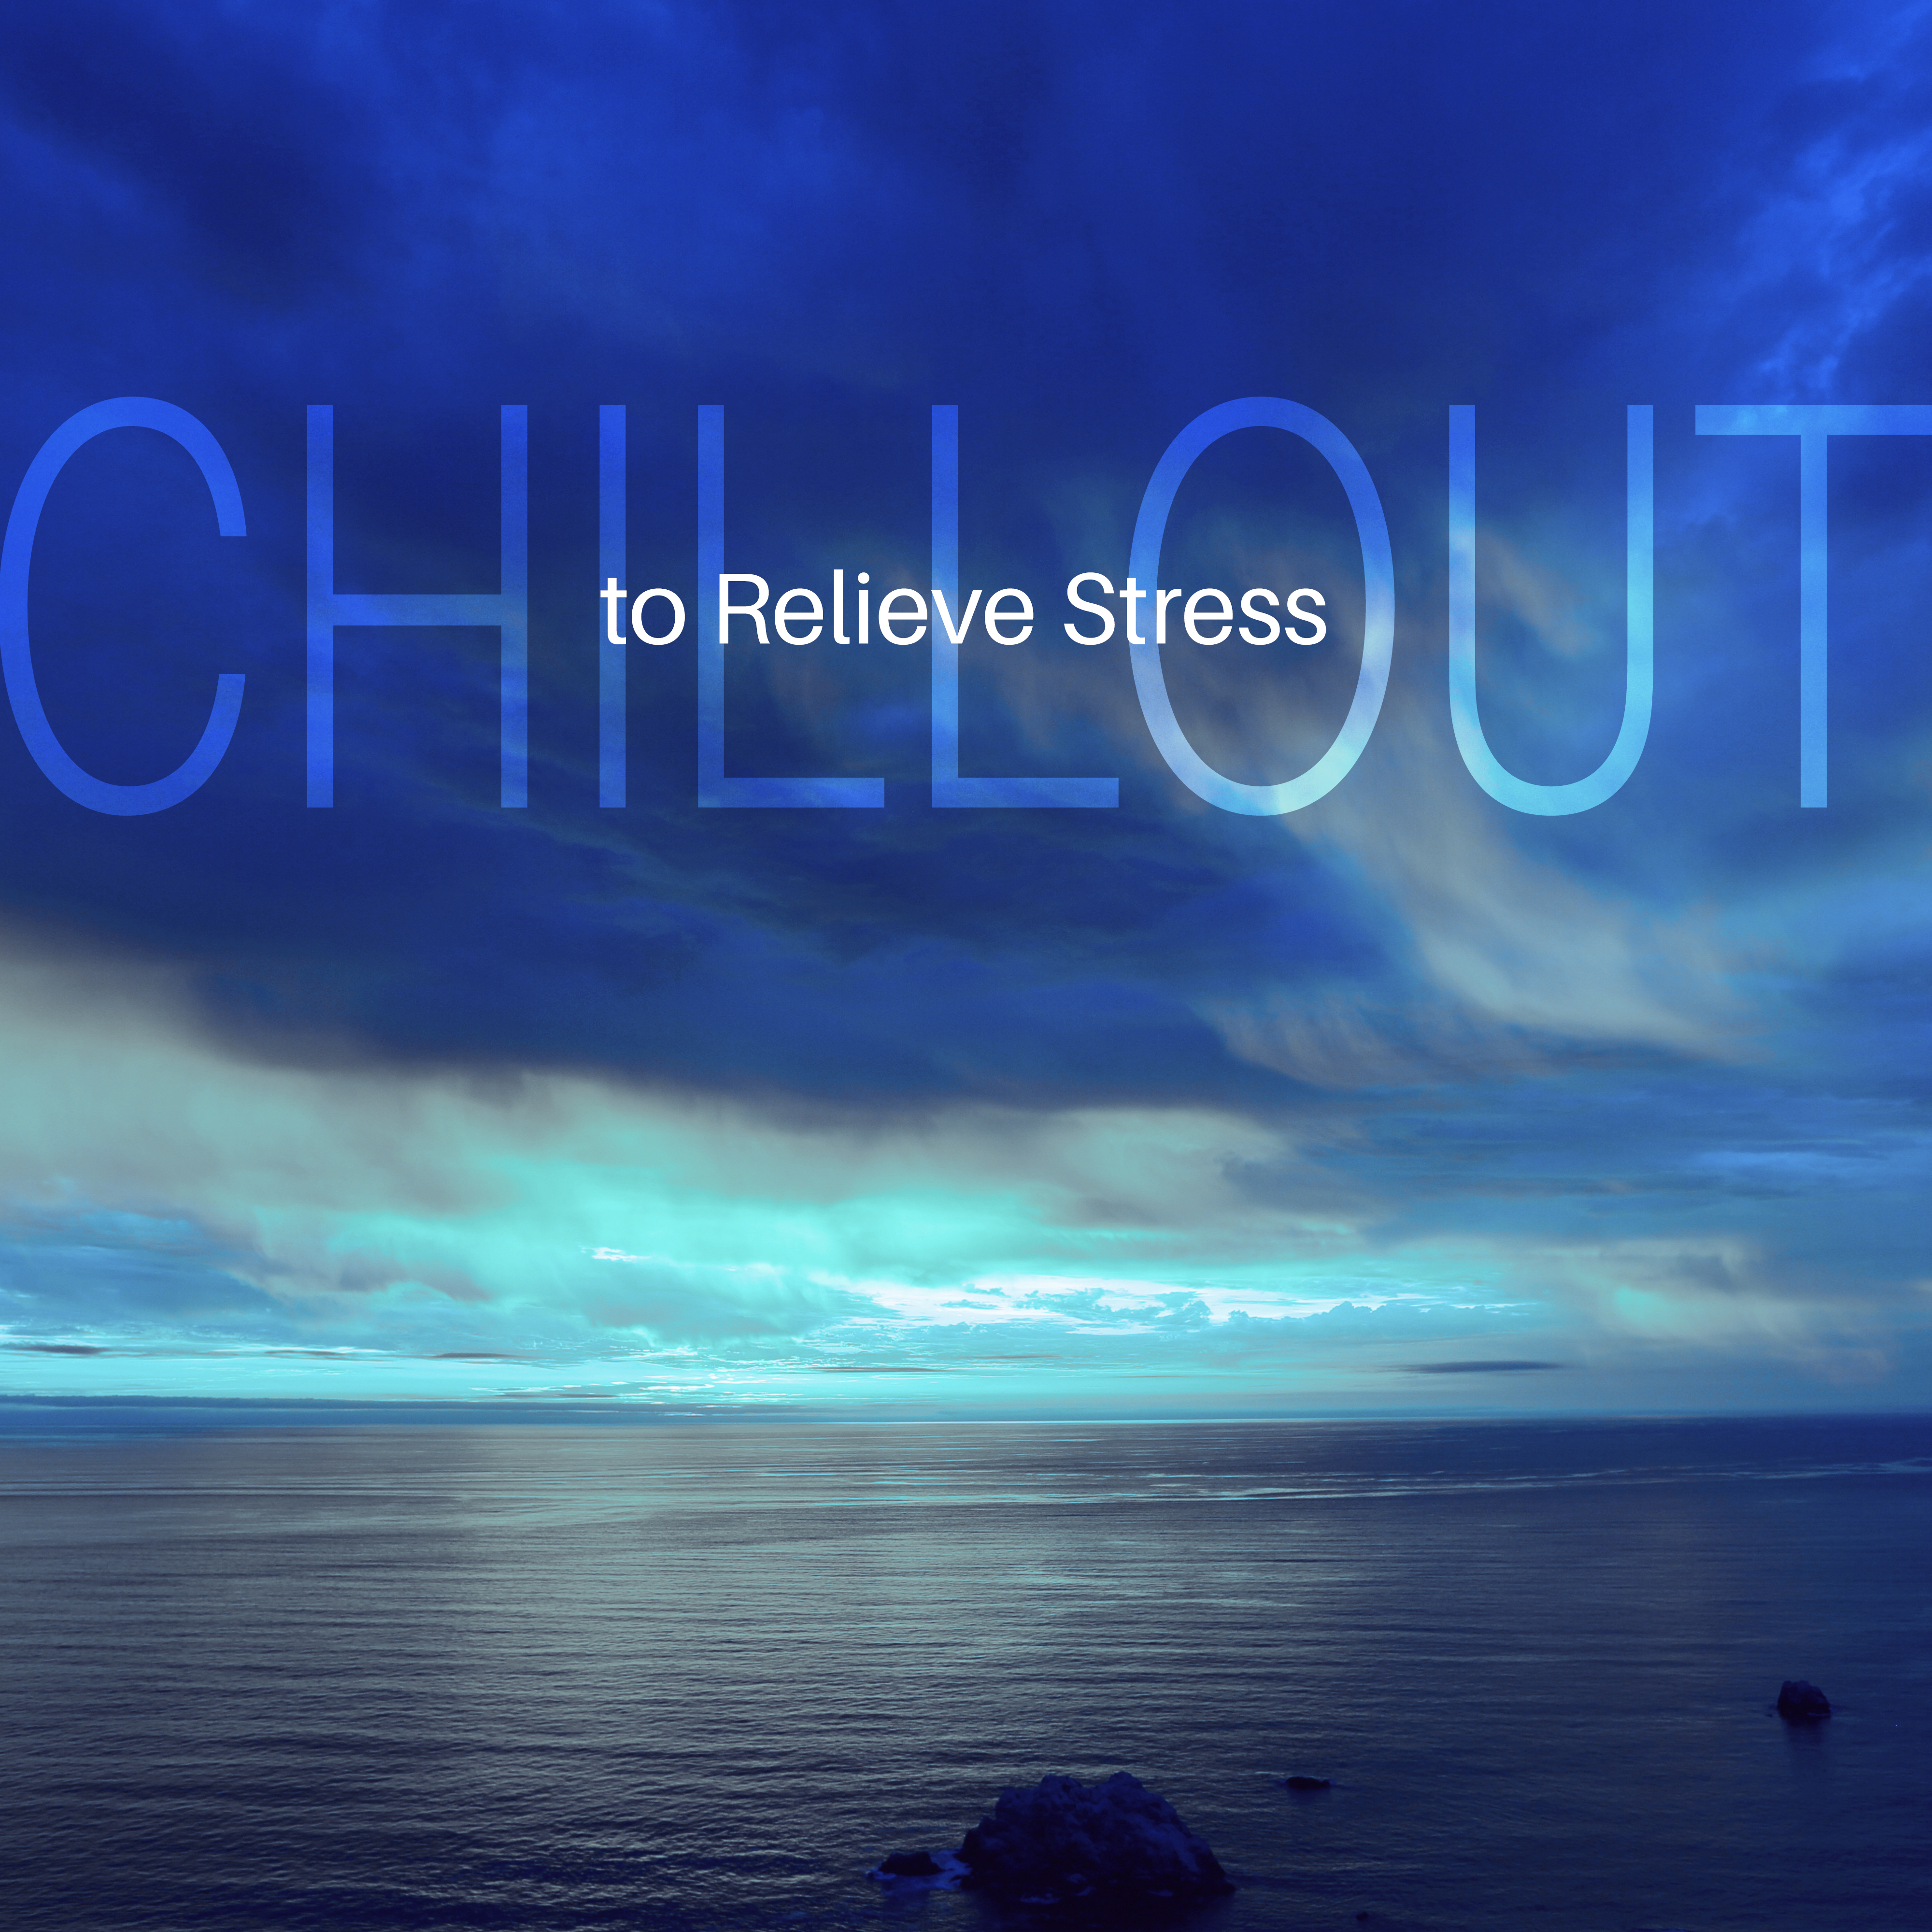 Chill Out to Relieve Stress – Summer Rest, Holiday Journey Music, Chill Out Waves